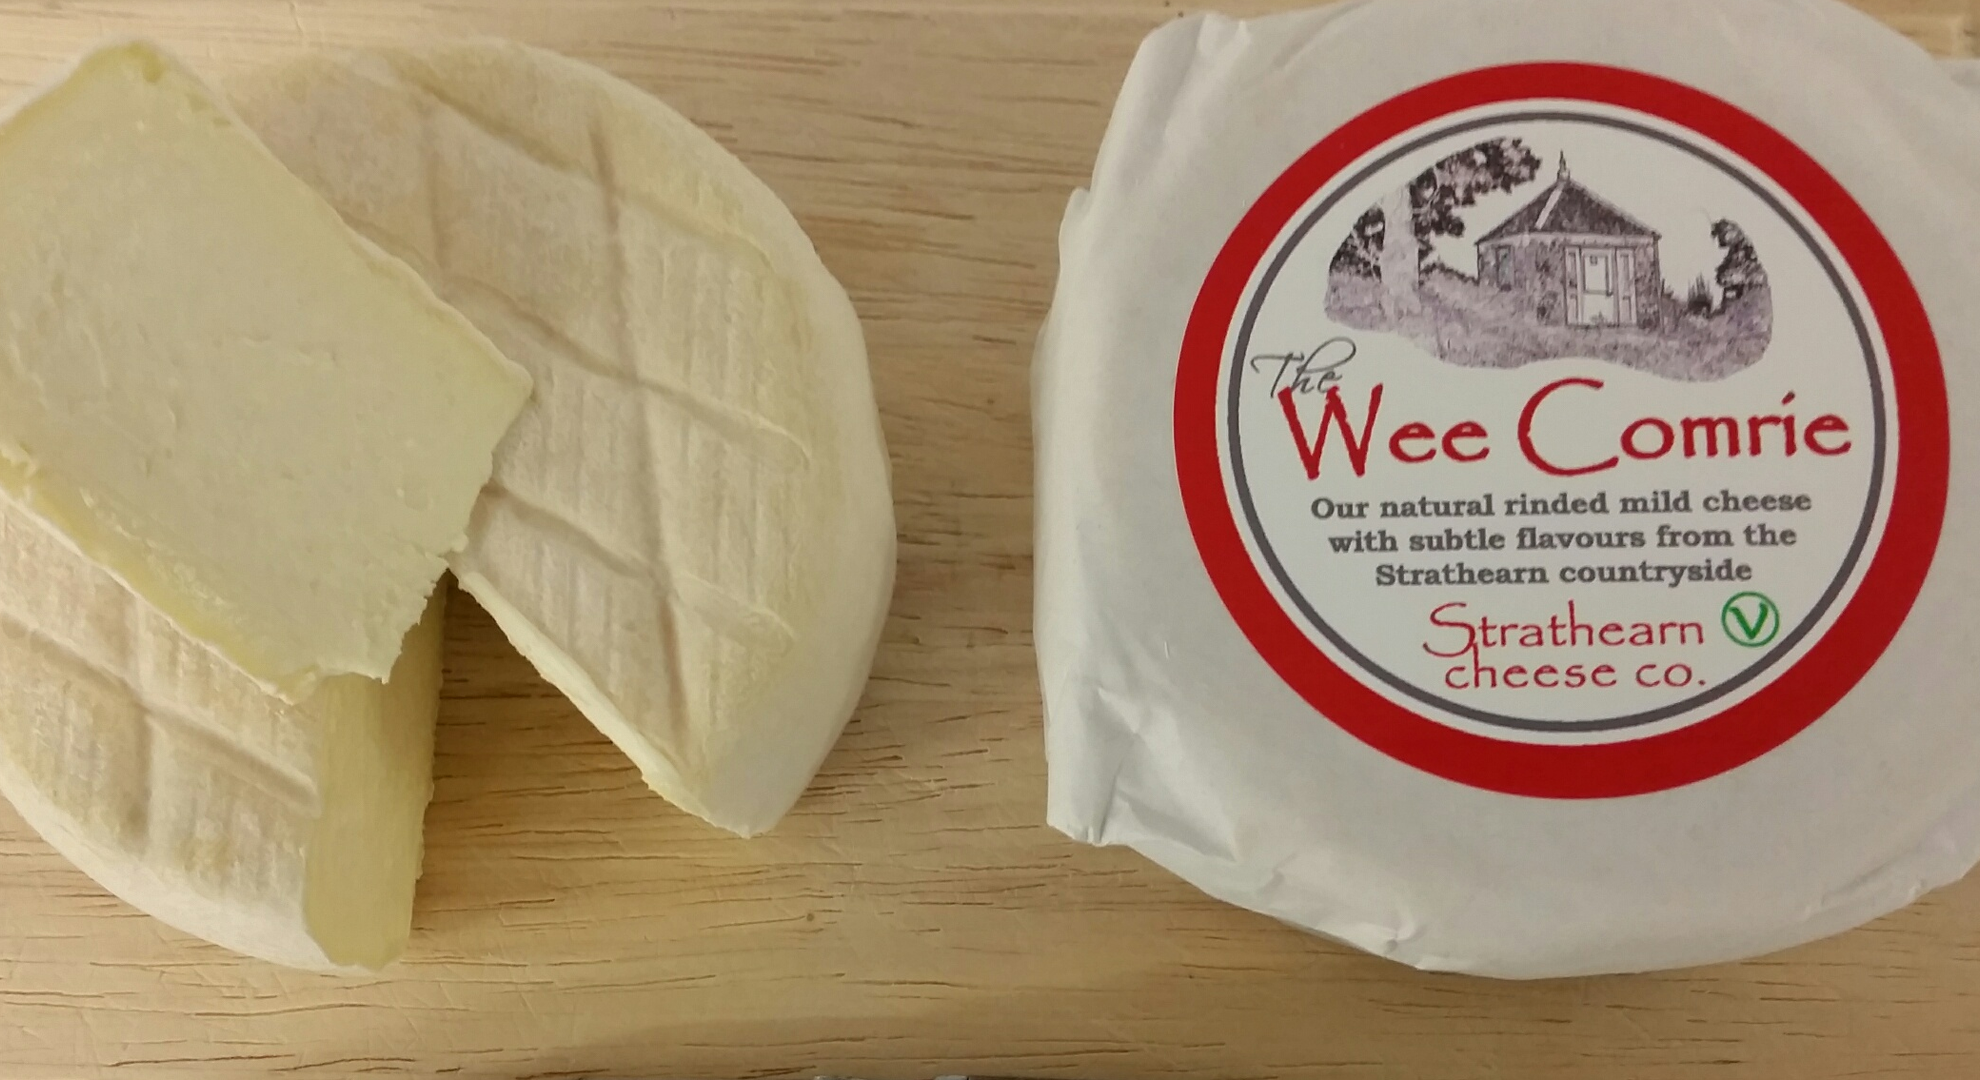 A portion of cheese from the Strathearn Cheese Company